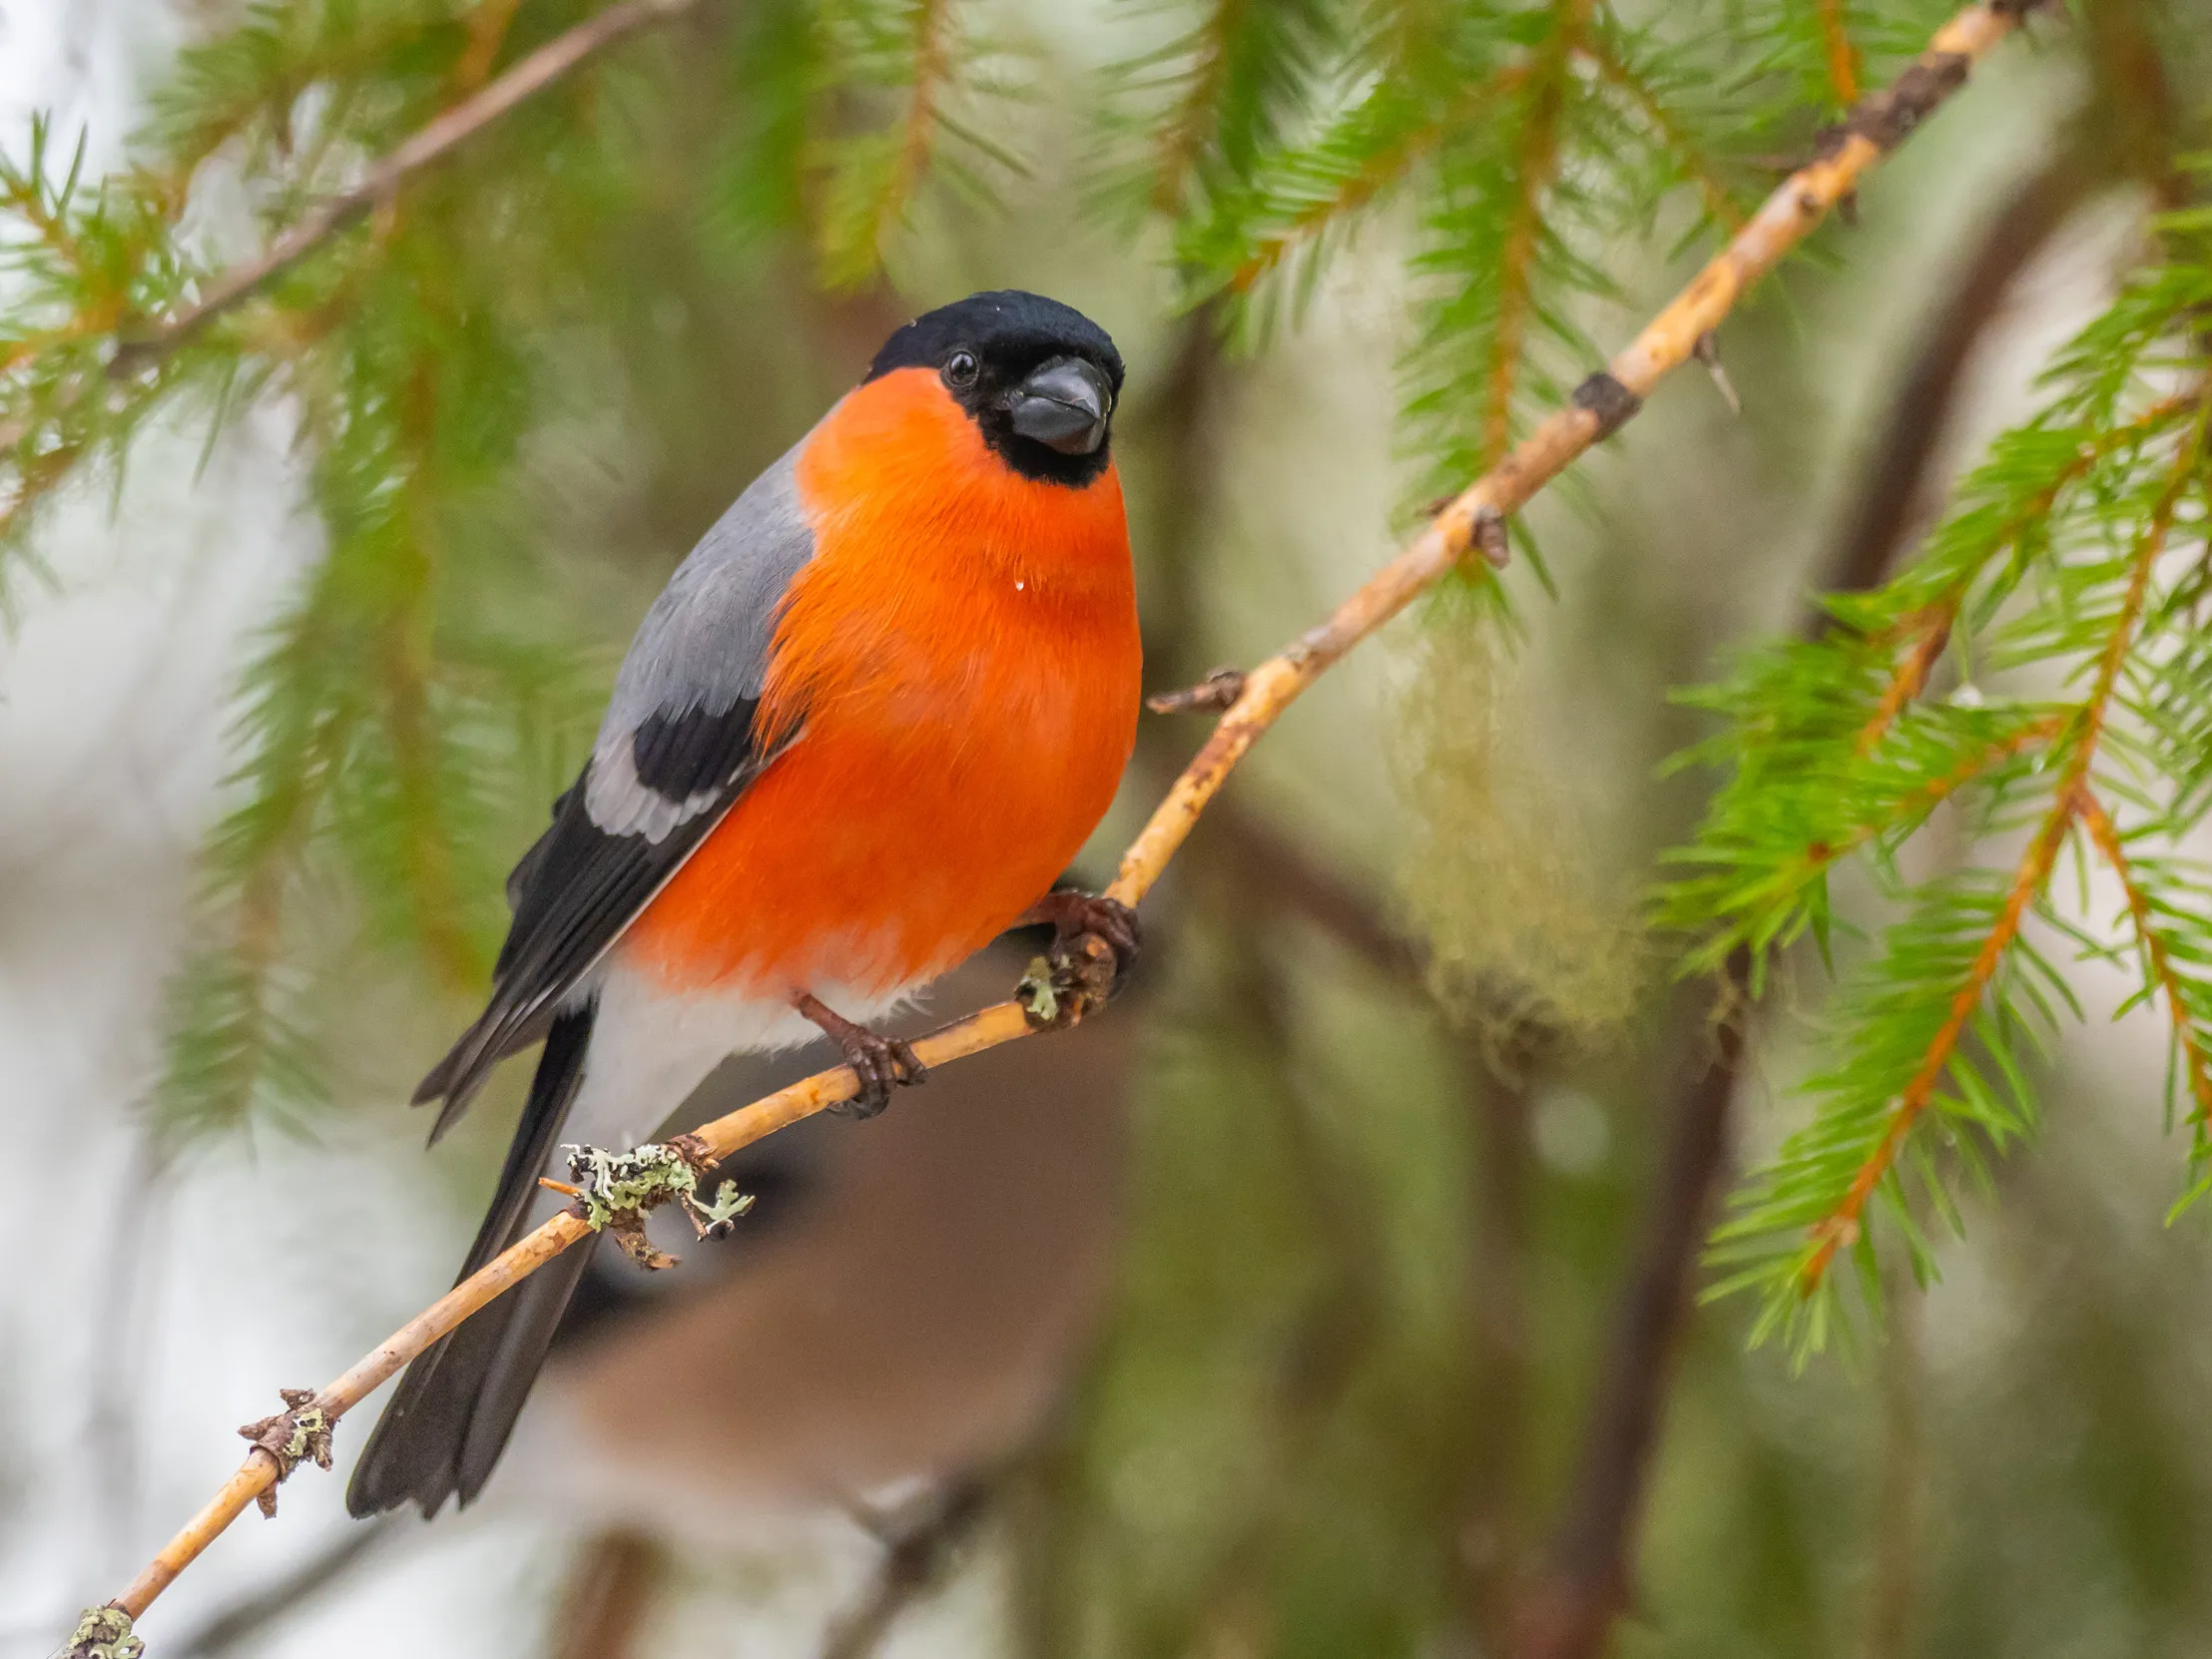 A Bullfinch, perched on a the branch of a pine tree, with snow in the background.